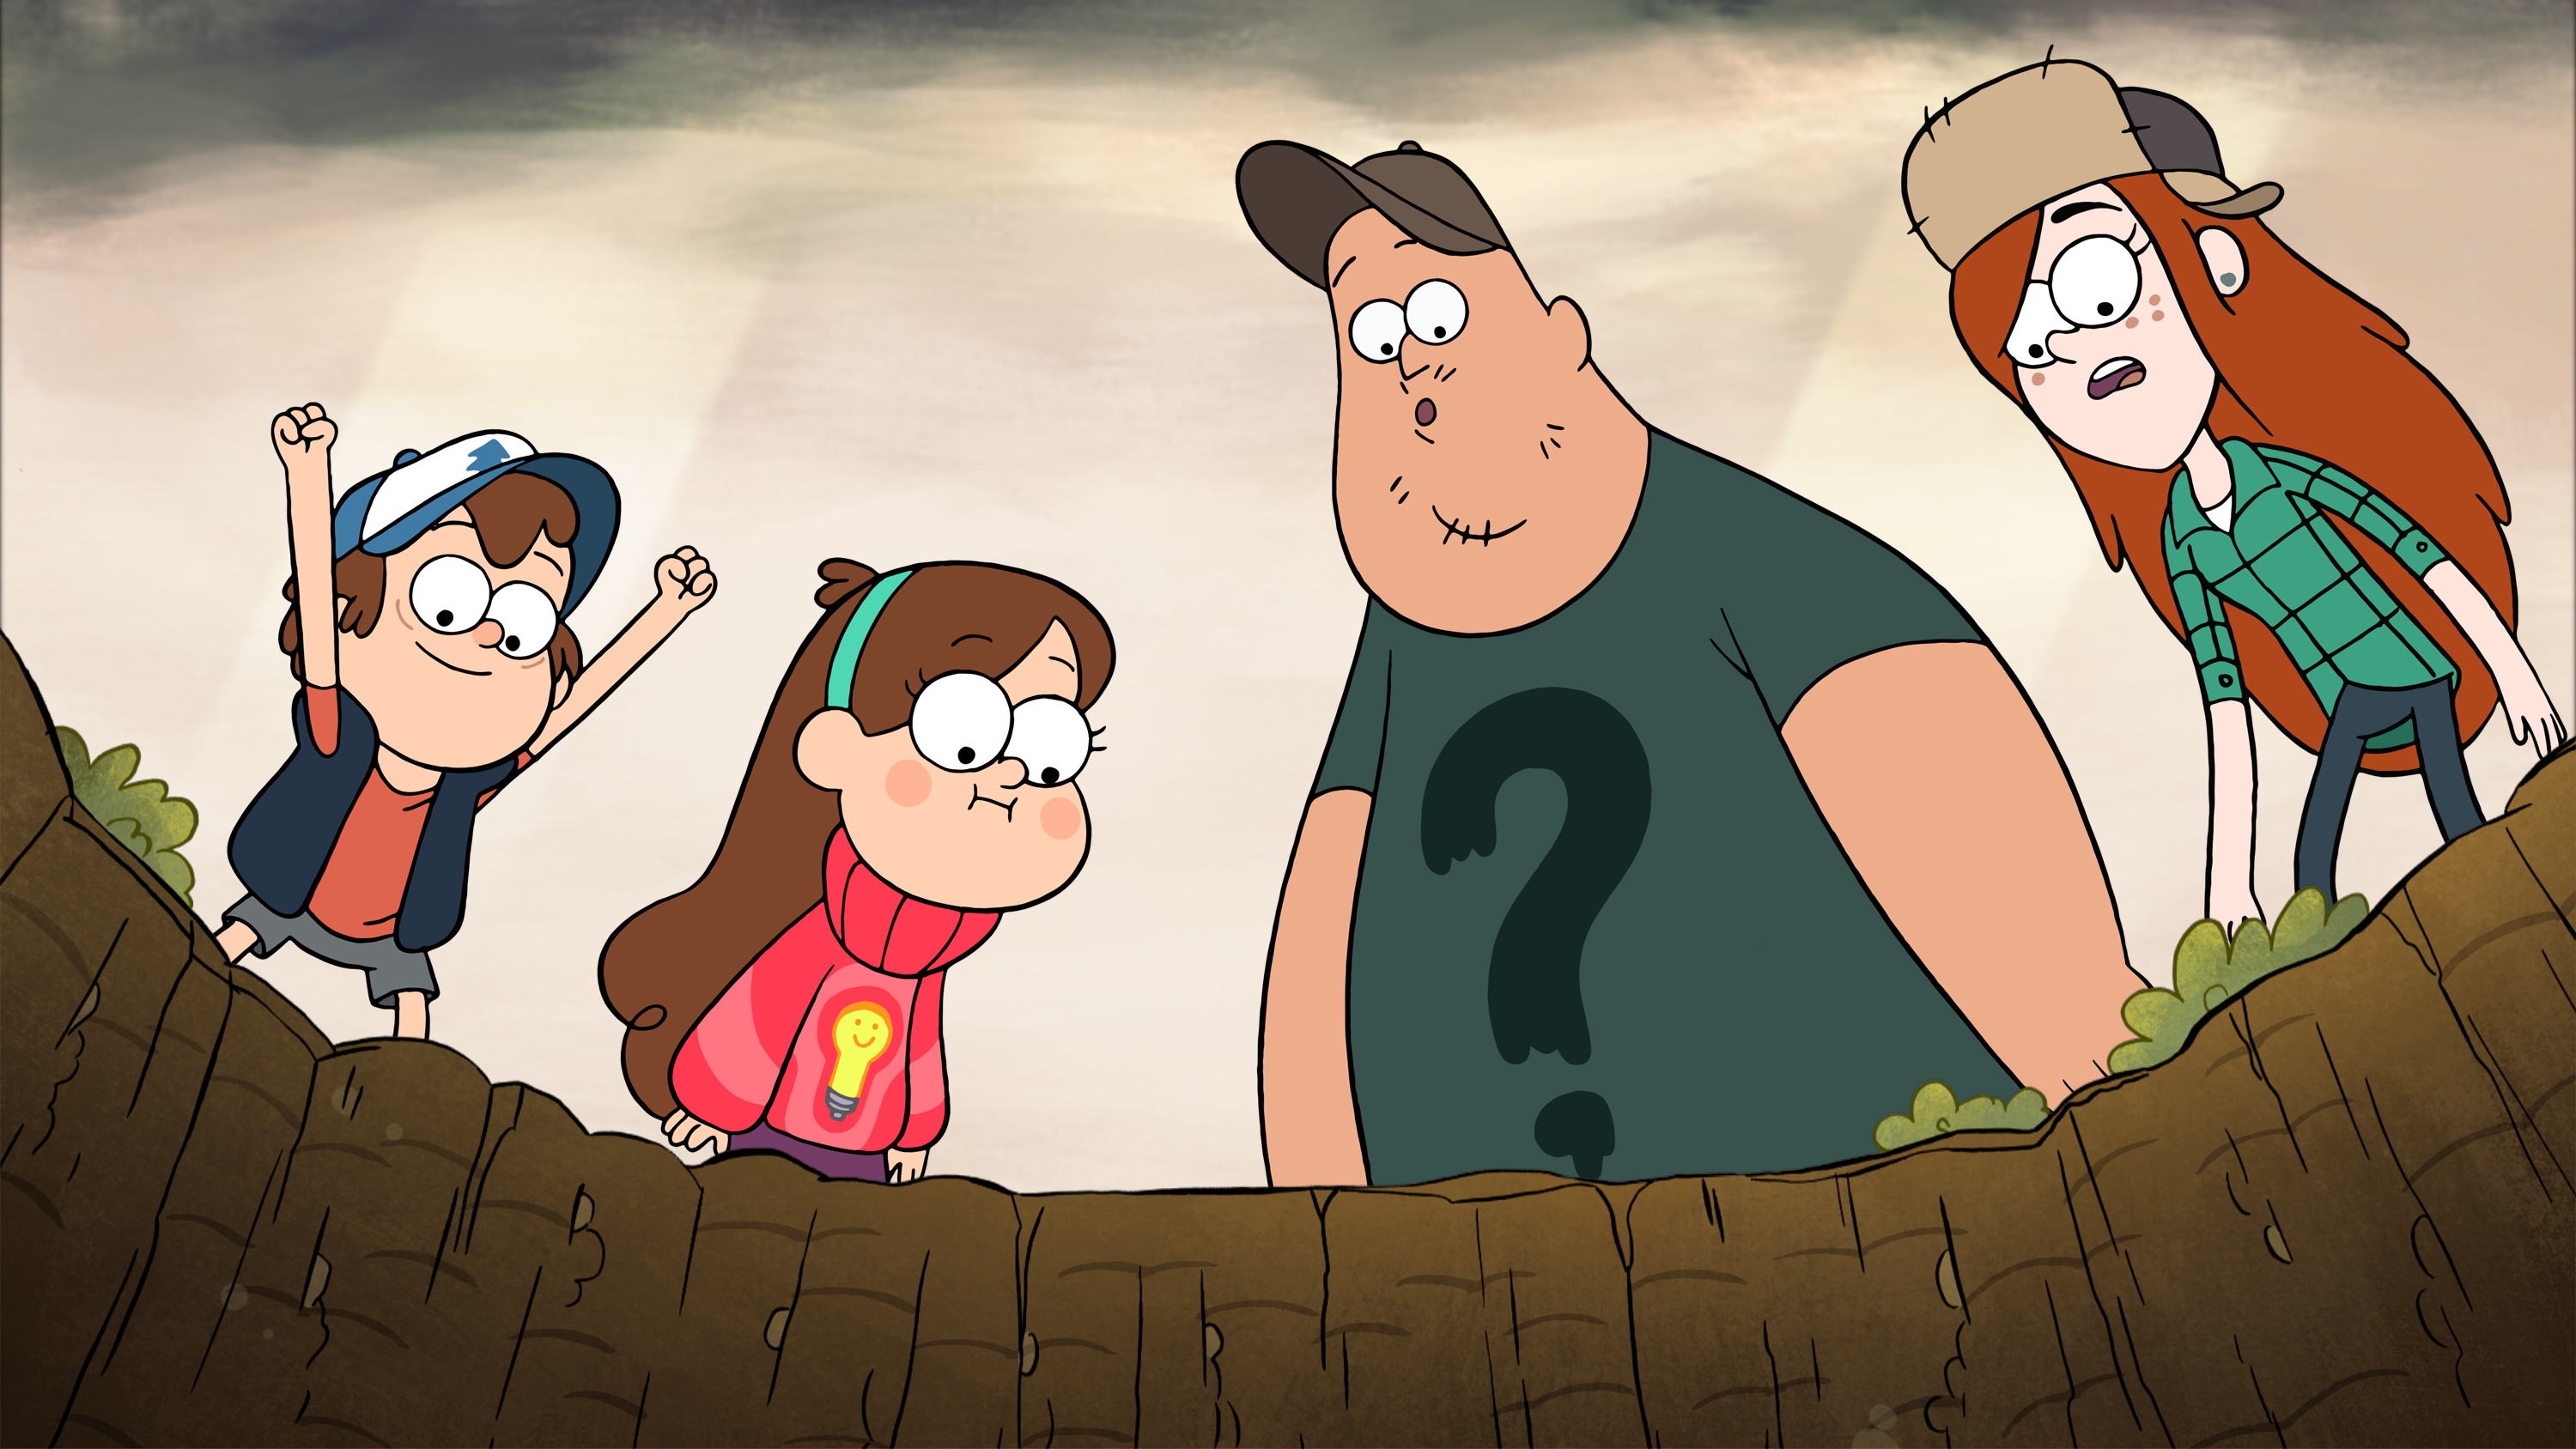 Dipper, Mabel, Soos and Wendy from <i>Gravity Falls</i> (Disney XD)